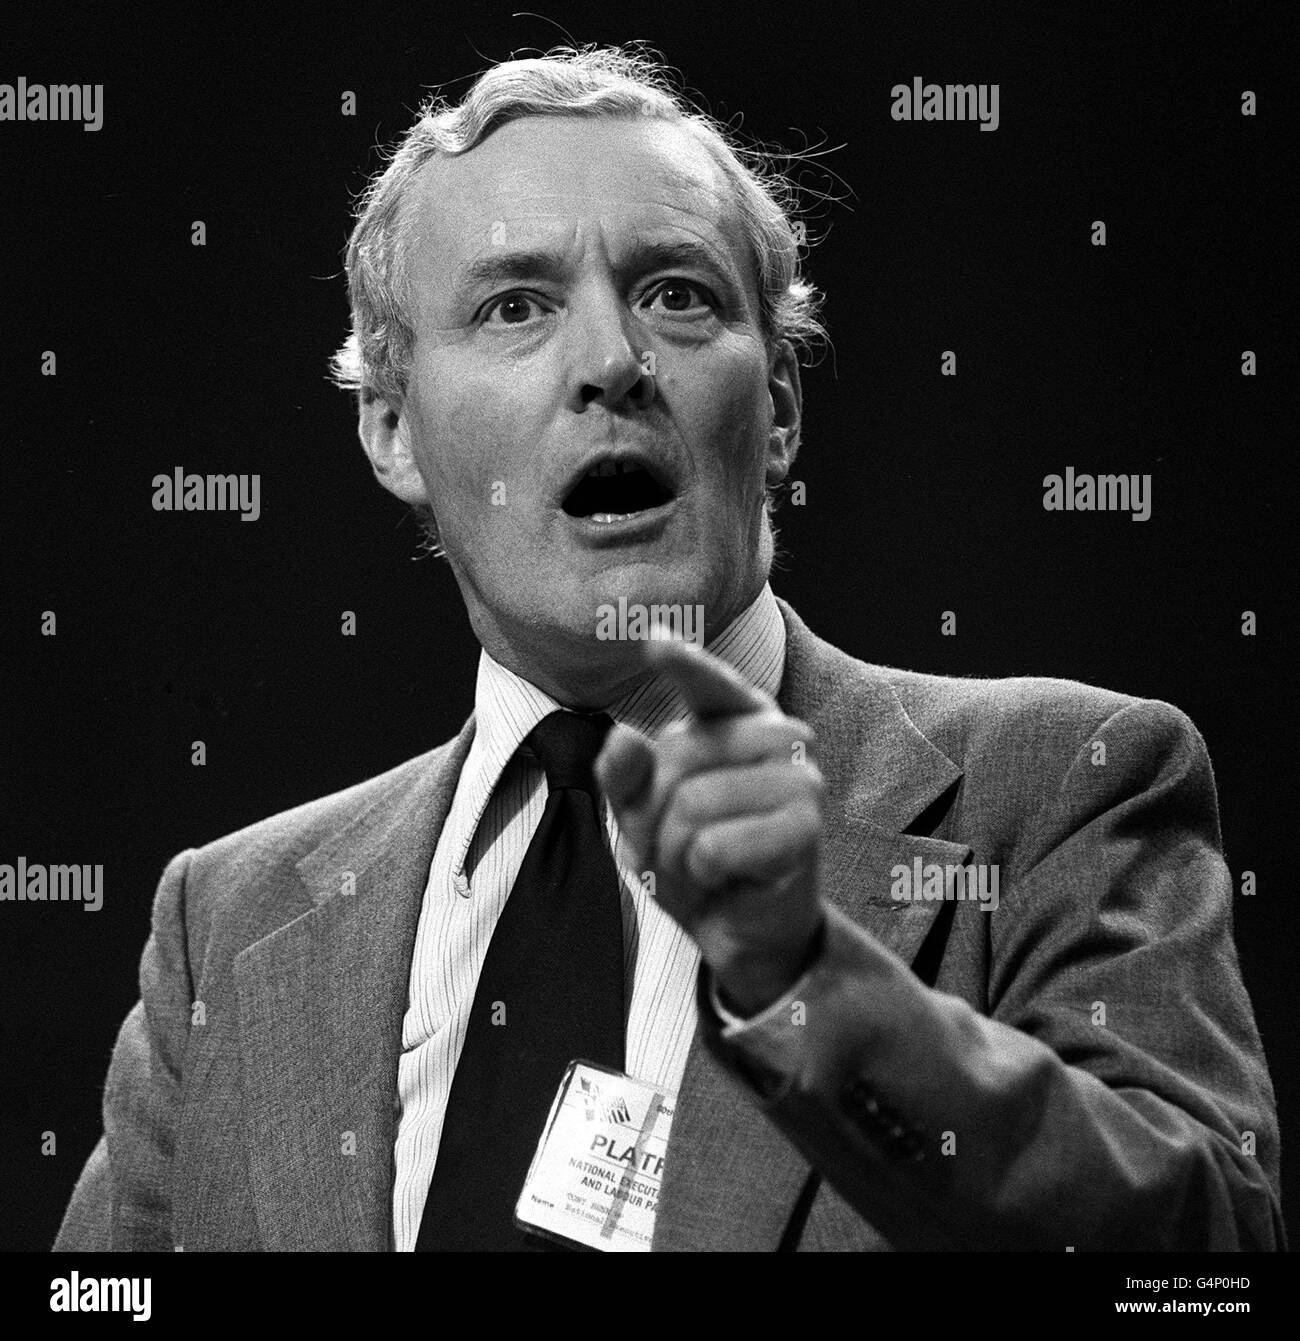 Tony Benn, who was defeated by Denis Healey in the election for the deputy leadership of the Labour Party, speaking at the party conference in Brighton. Stock Photo